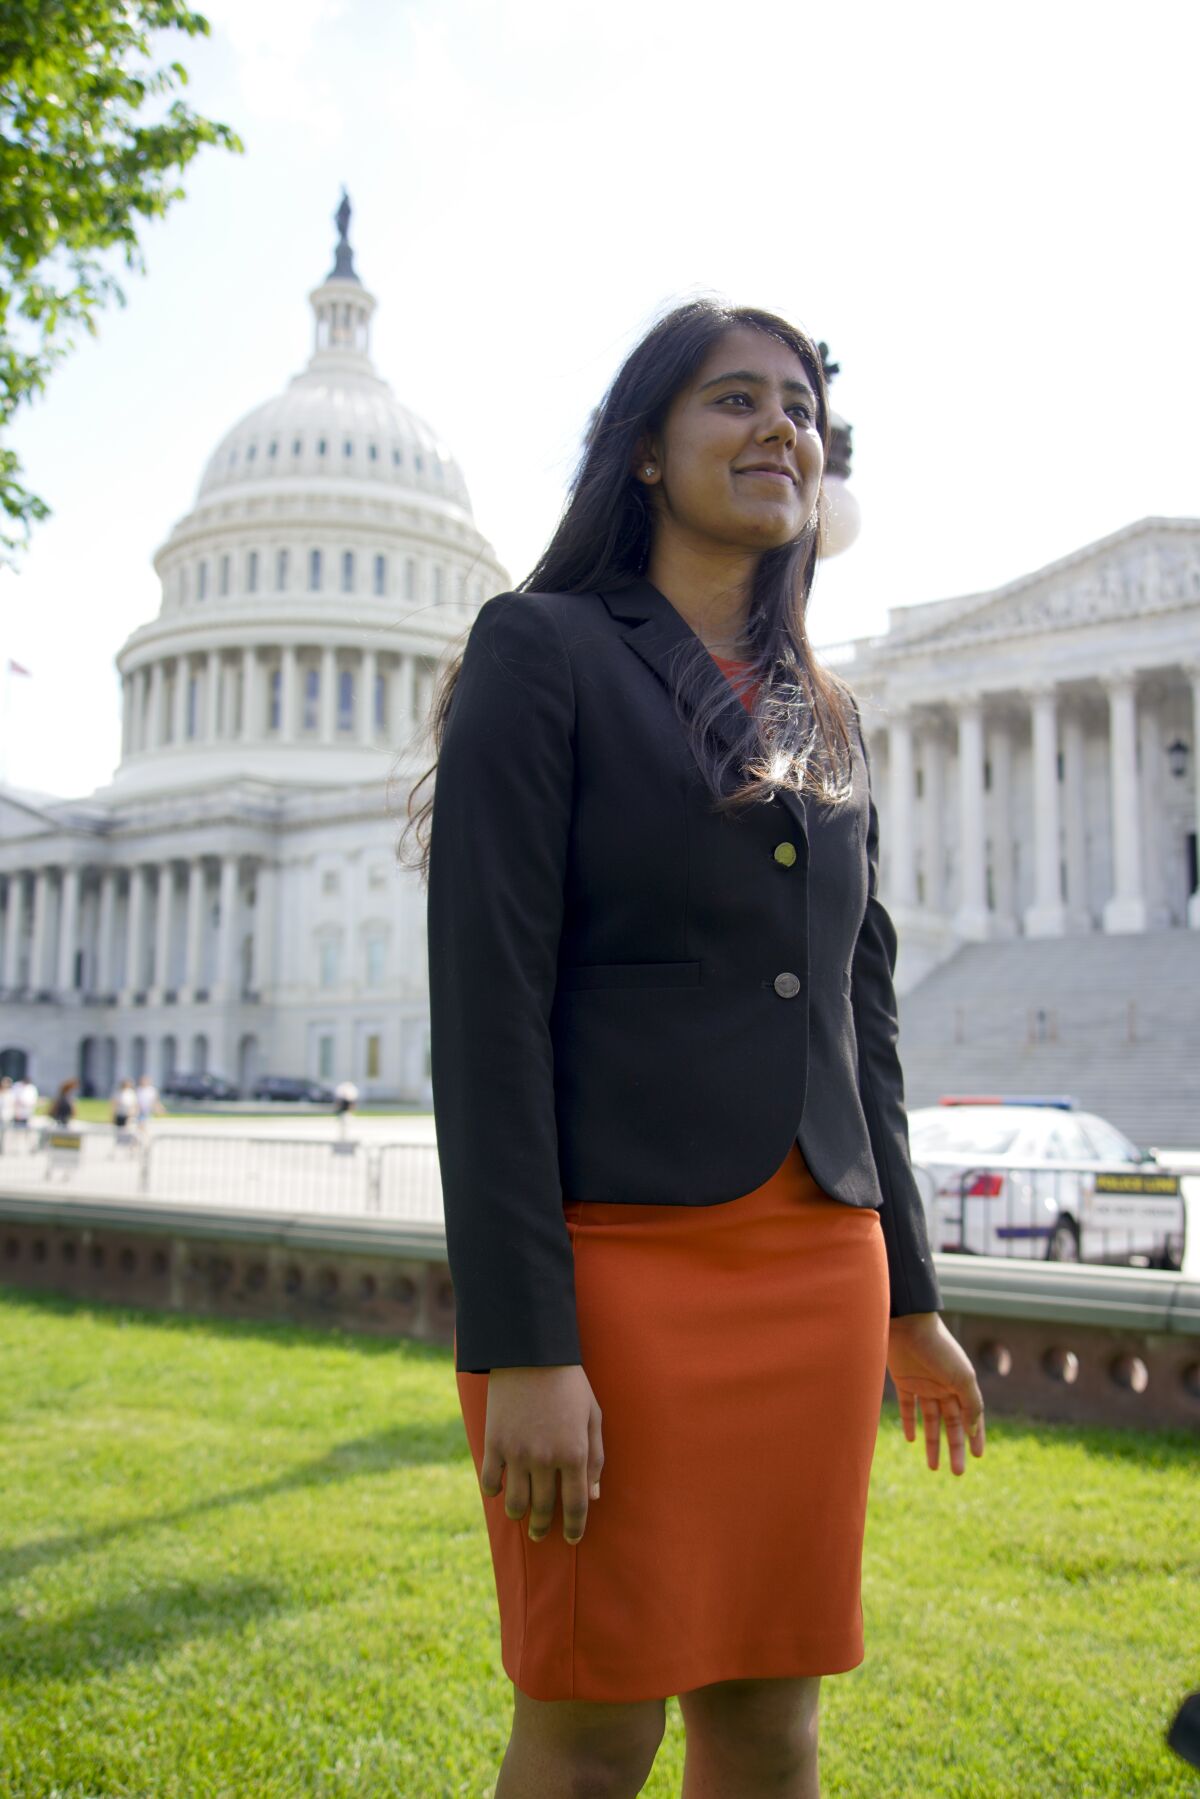 Reet Mishra, an incoming senior at UC Berkeley, was born in India and moved to Sunnyvale.